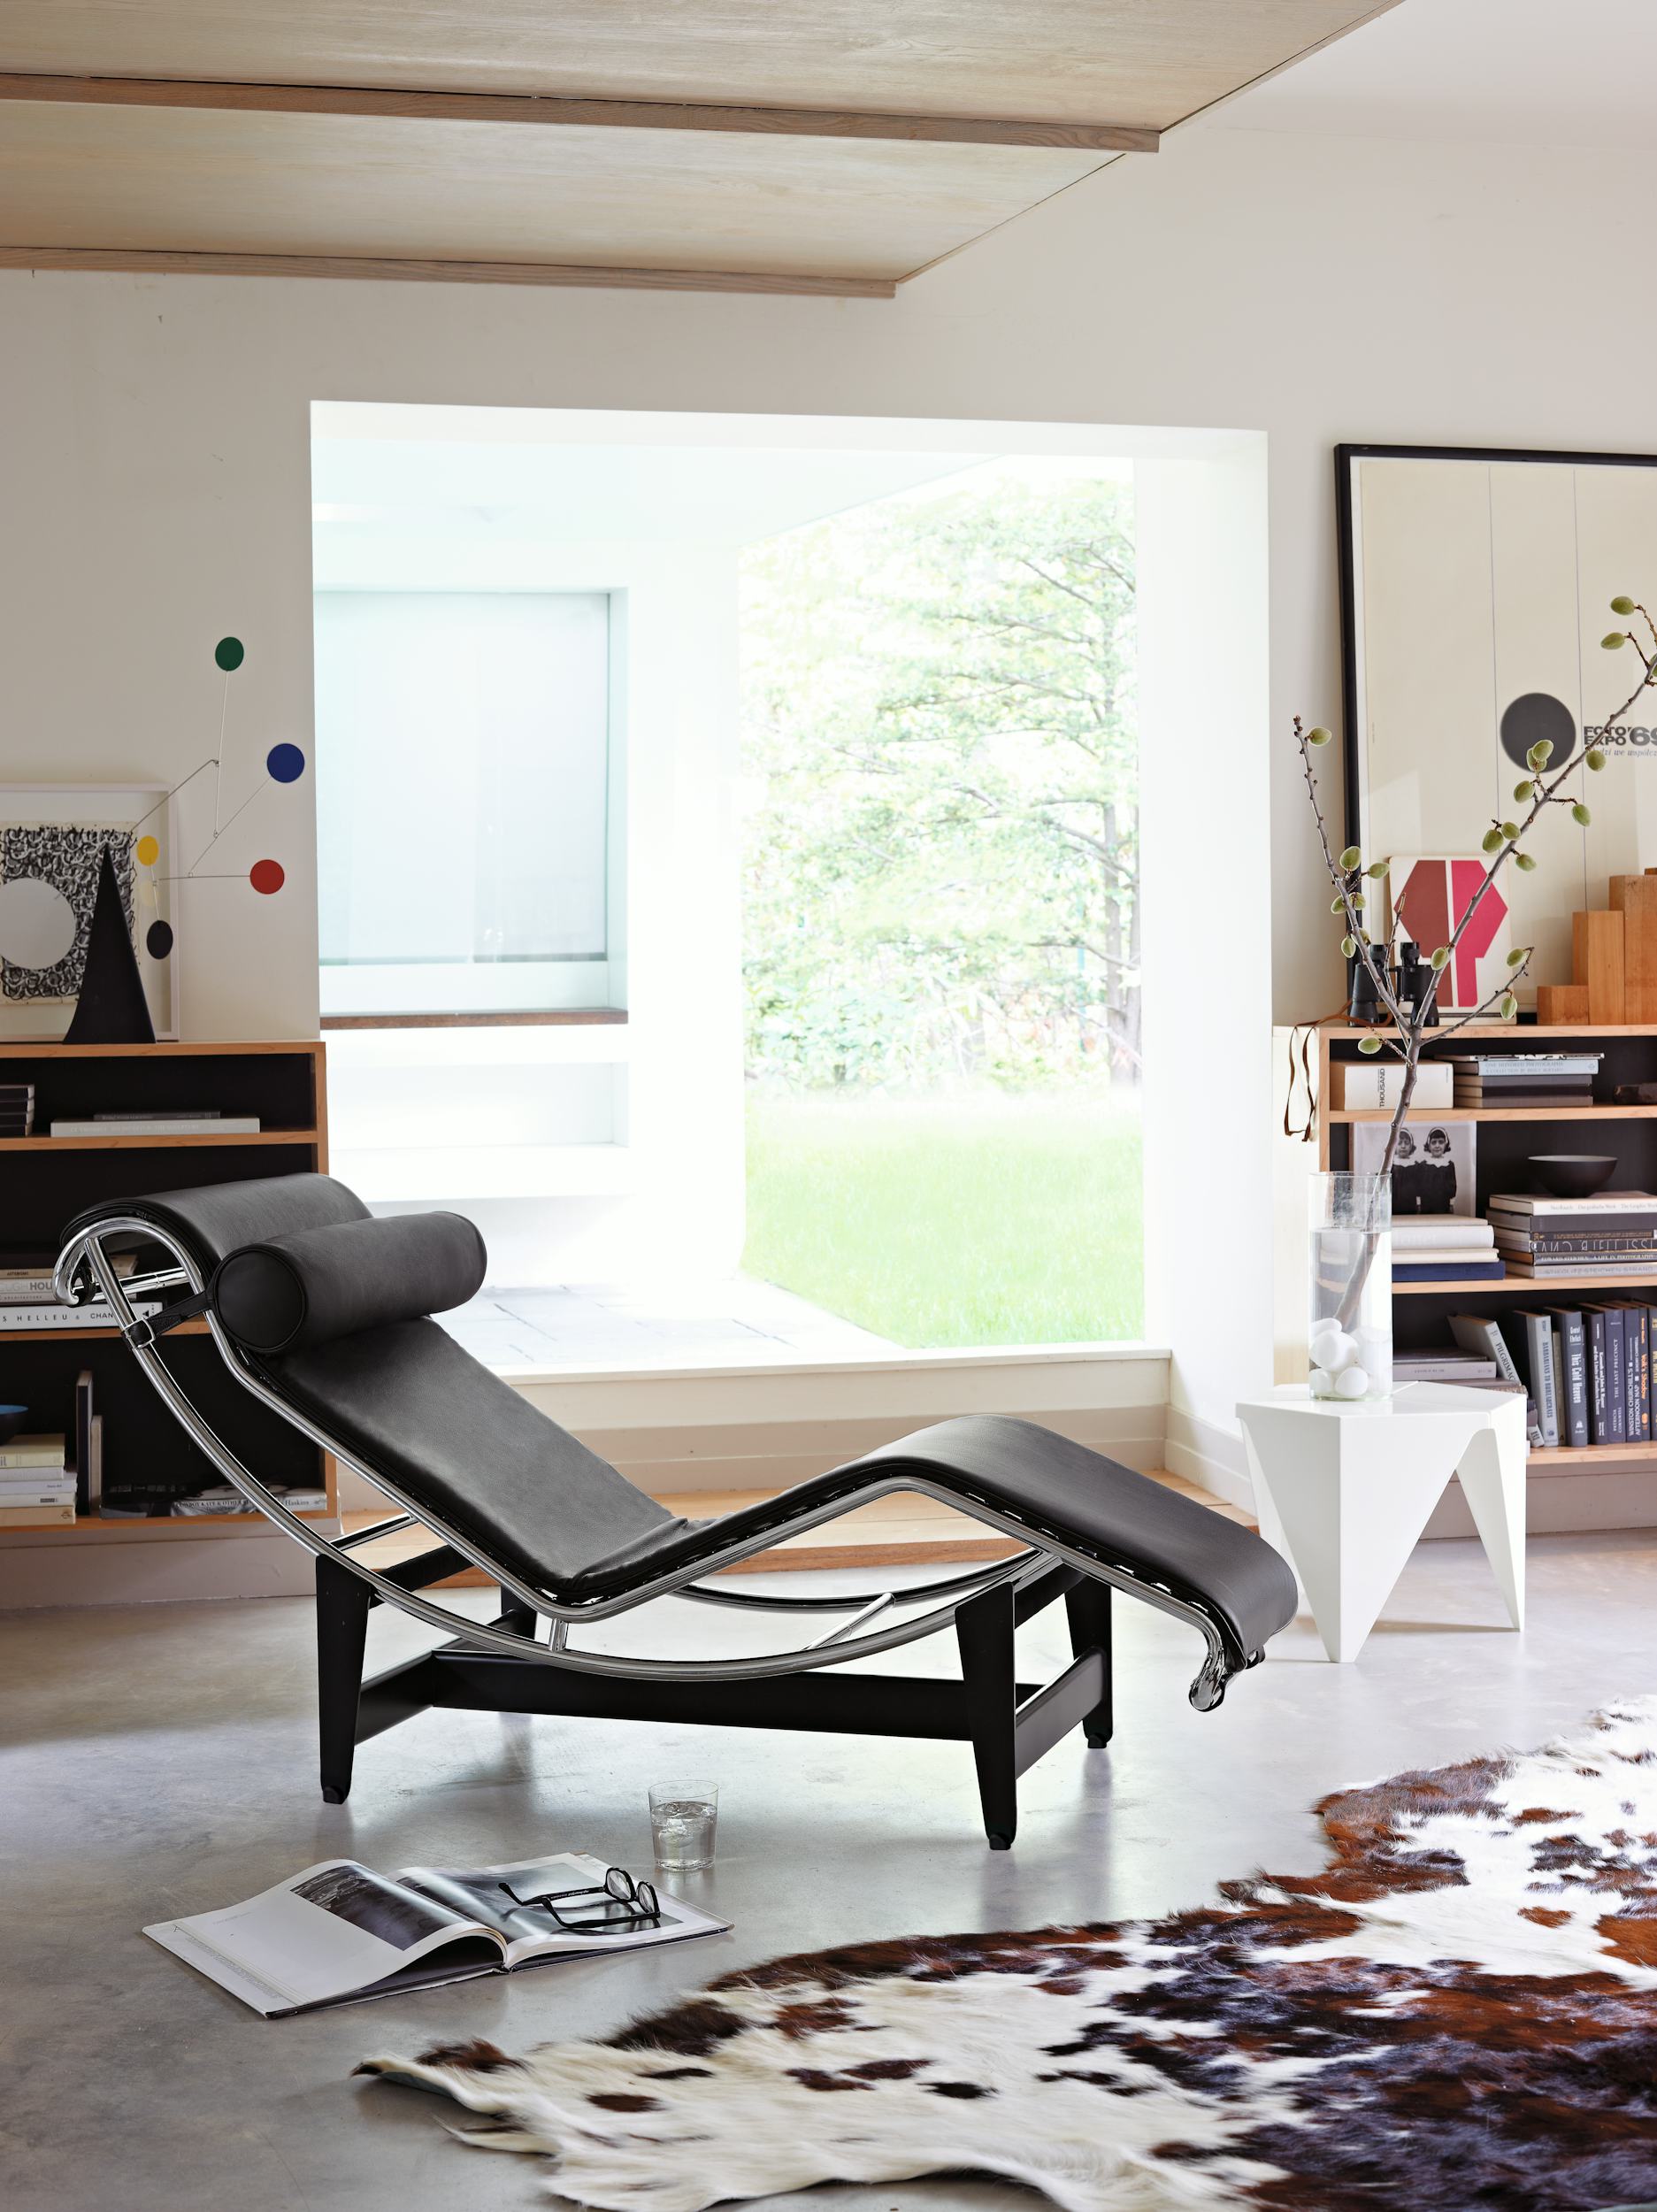 Le Corbusier LC4 Chaise Lounge produced by Cassina